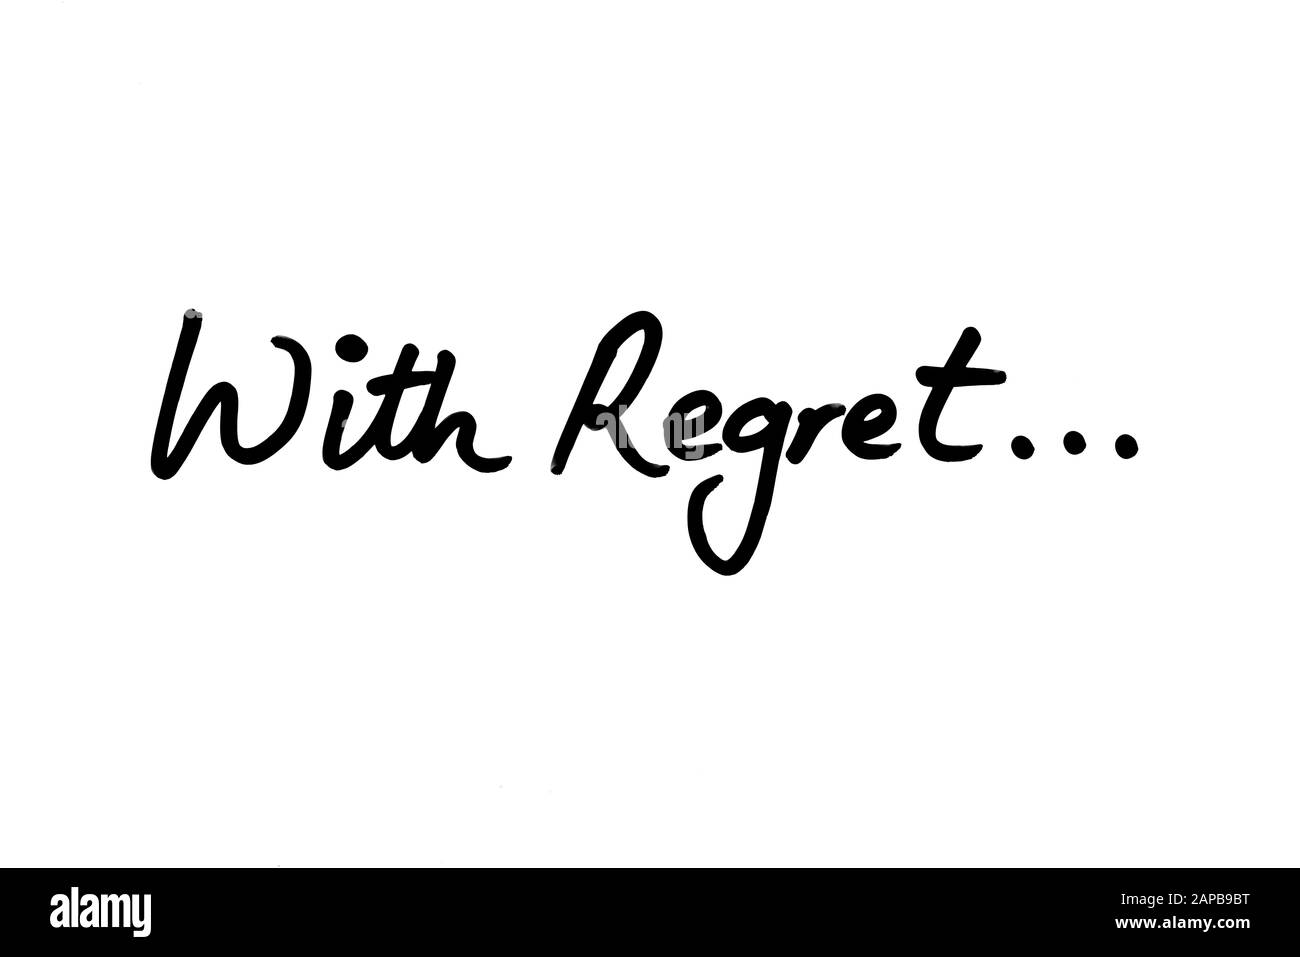 With Regret… handwritten on a white background. Stock Photo